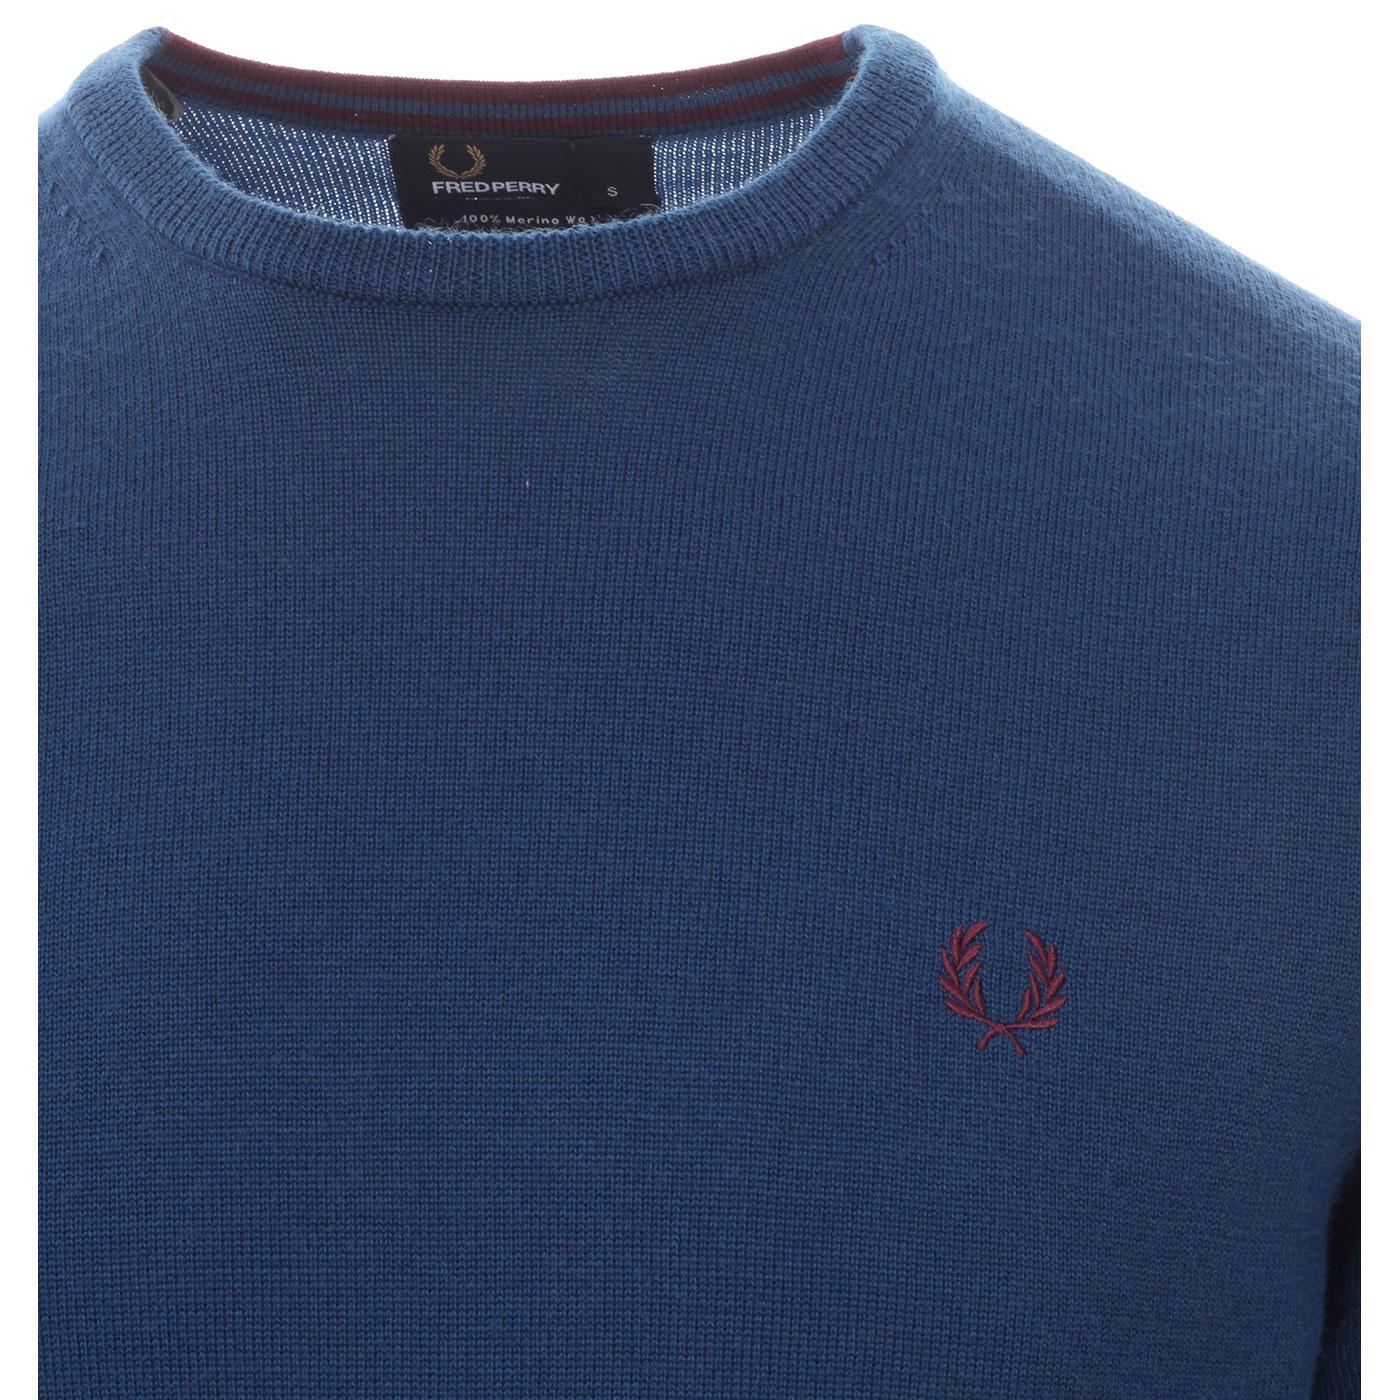 FRED PERRY Merino Wool Knitted Crew Jumper Service Blue